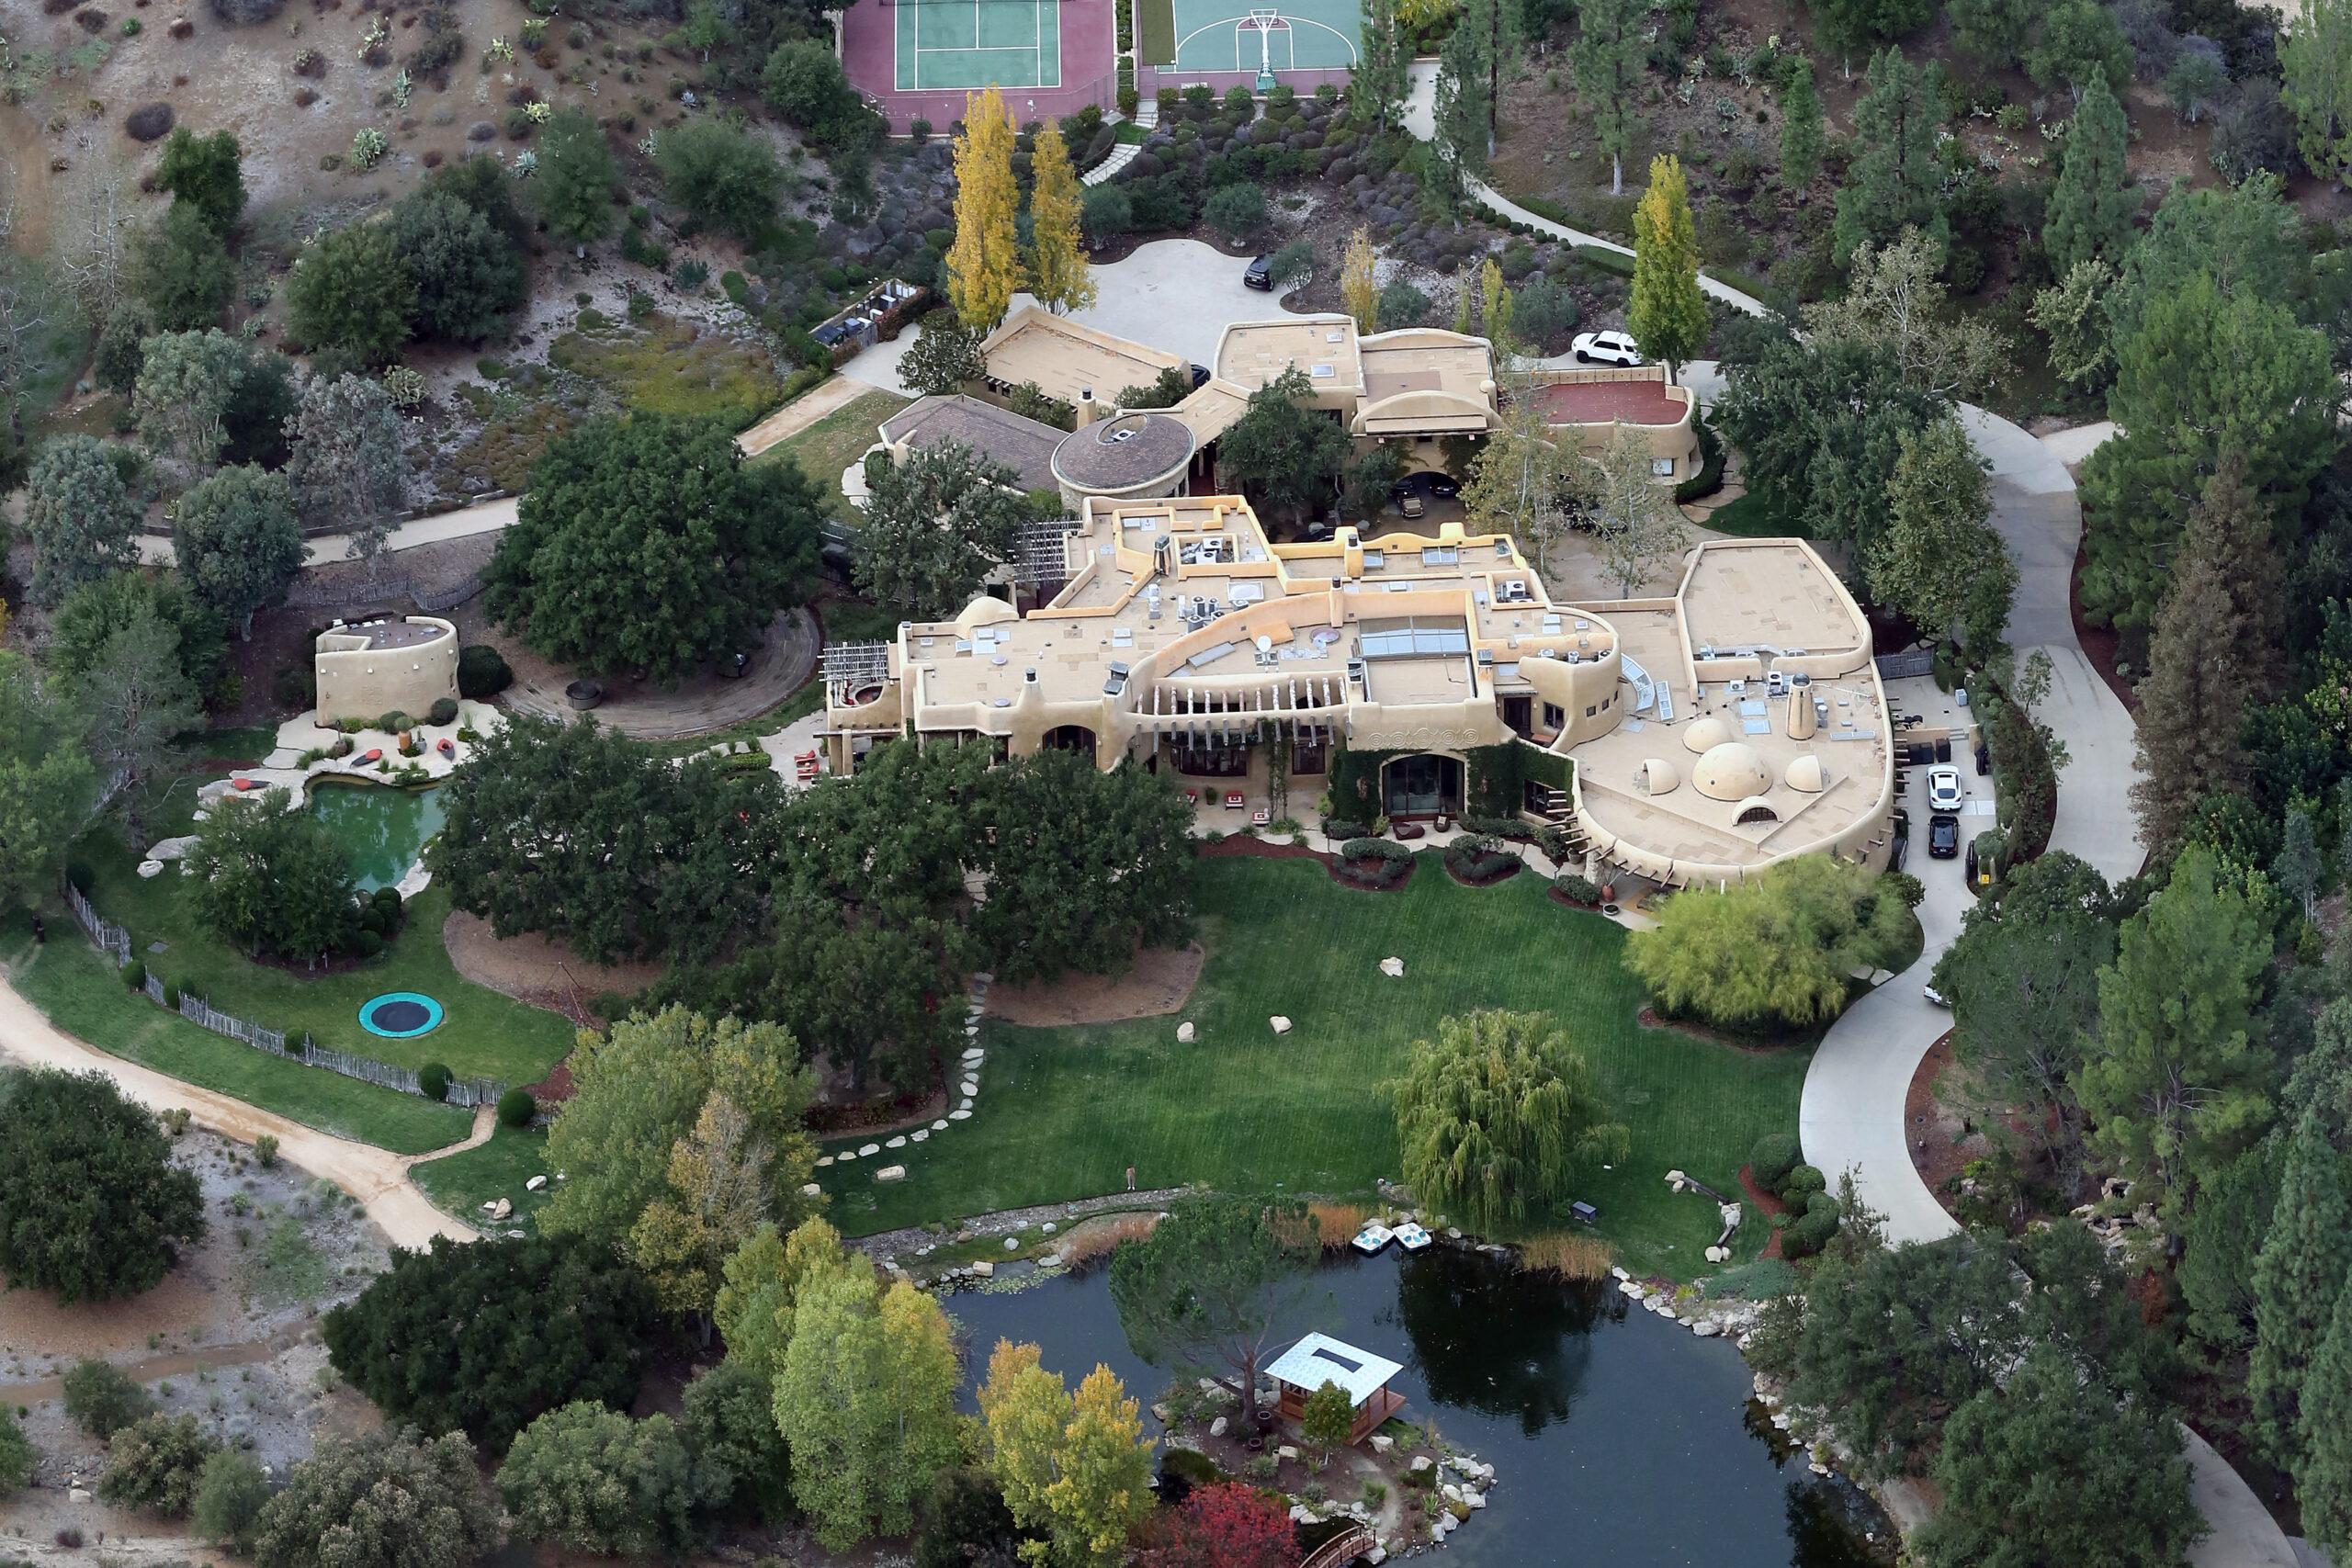 Will Smith huge Los Angeles home which survived the woolsey fire